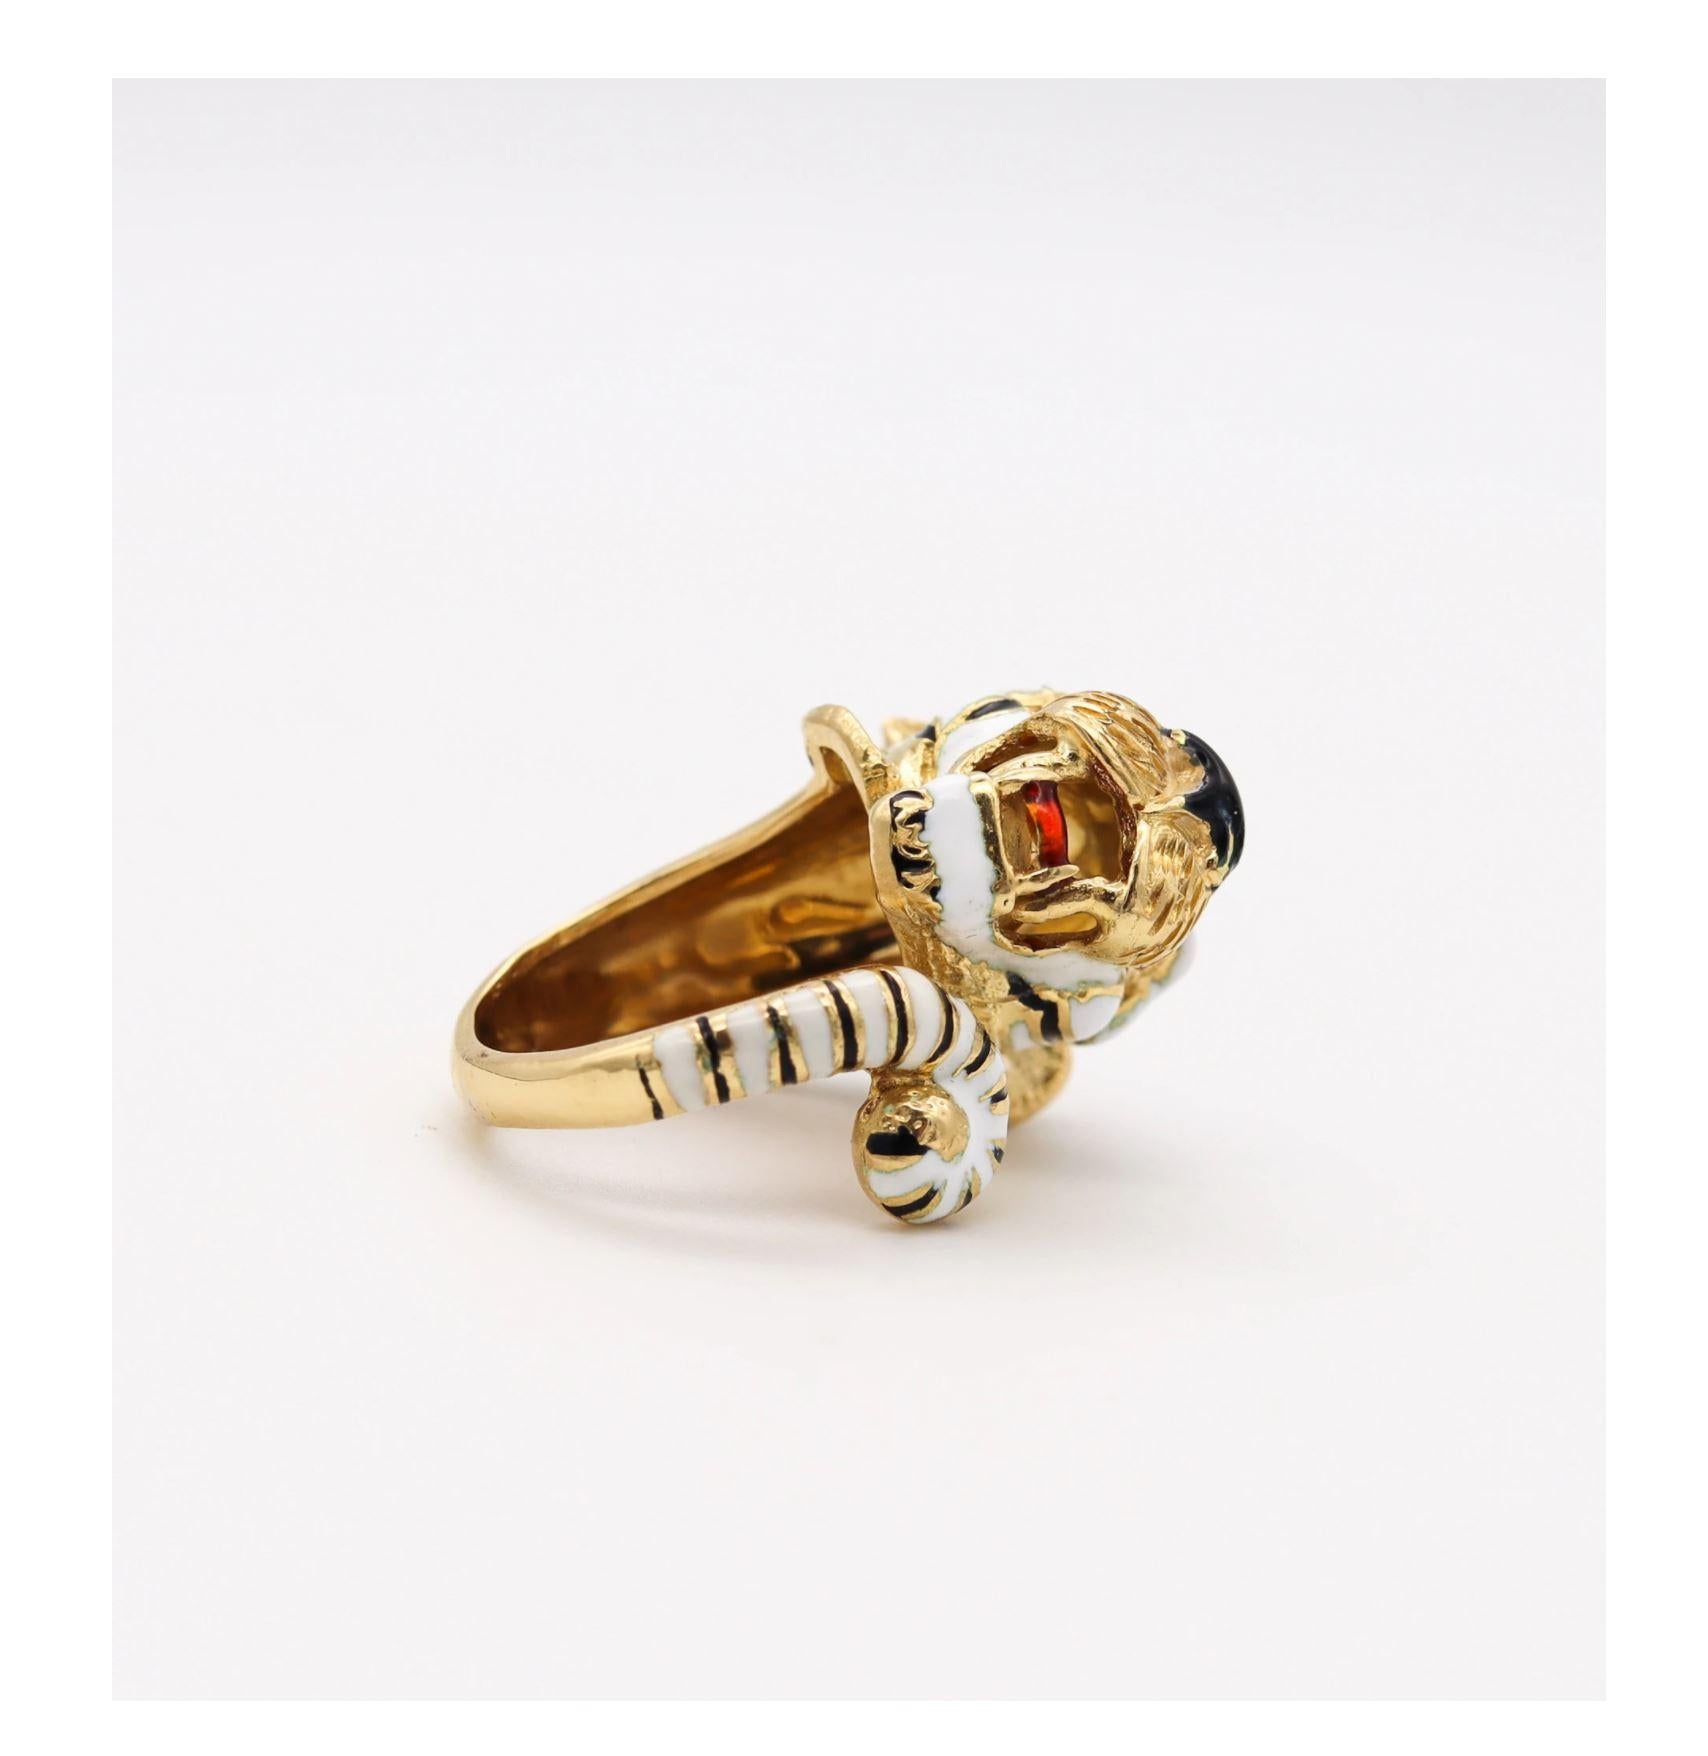 Modernist Frascarolo Milano Enameled Tiger Cocktail Ring in 18Kt Yellow Gold with Rubies